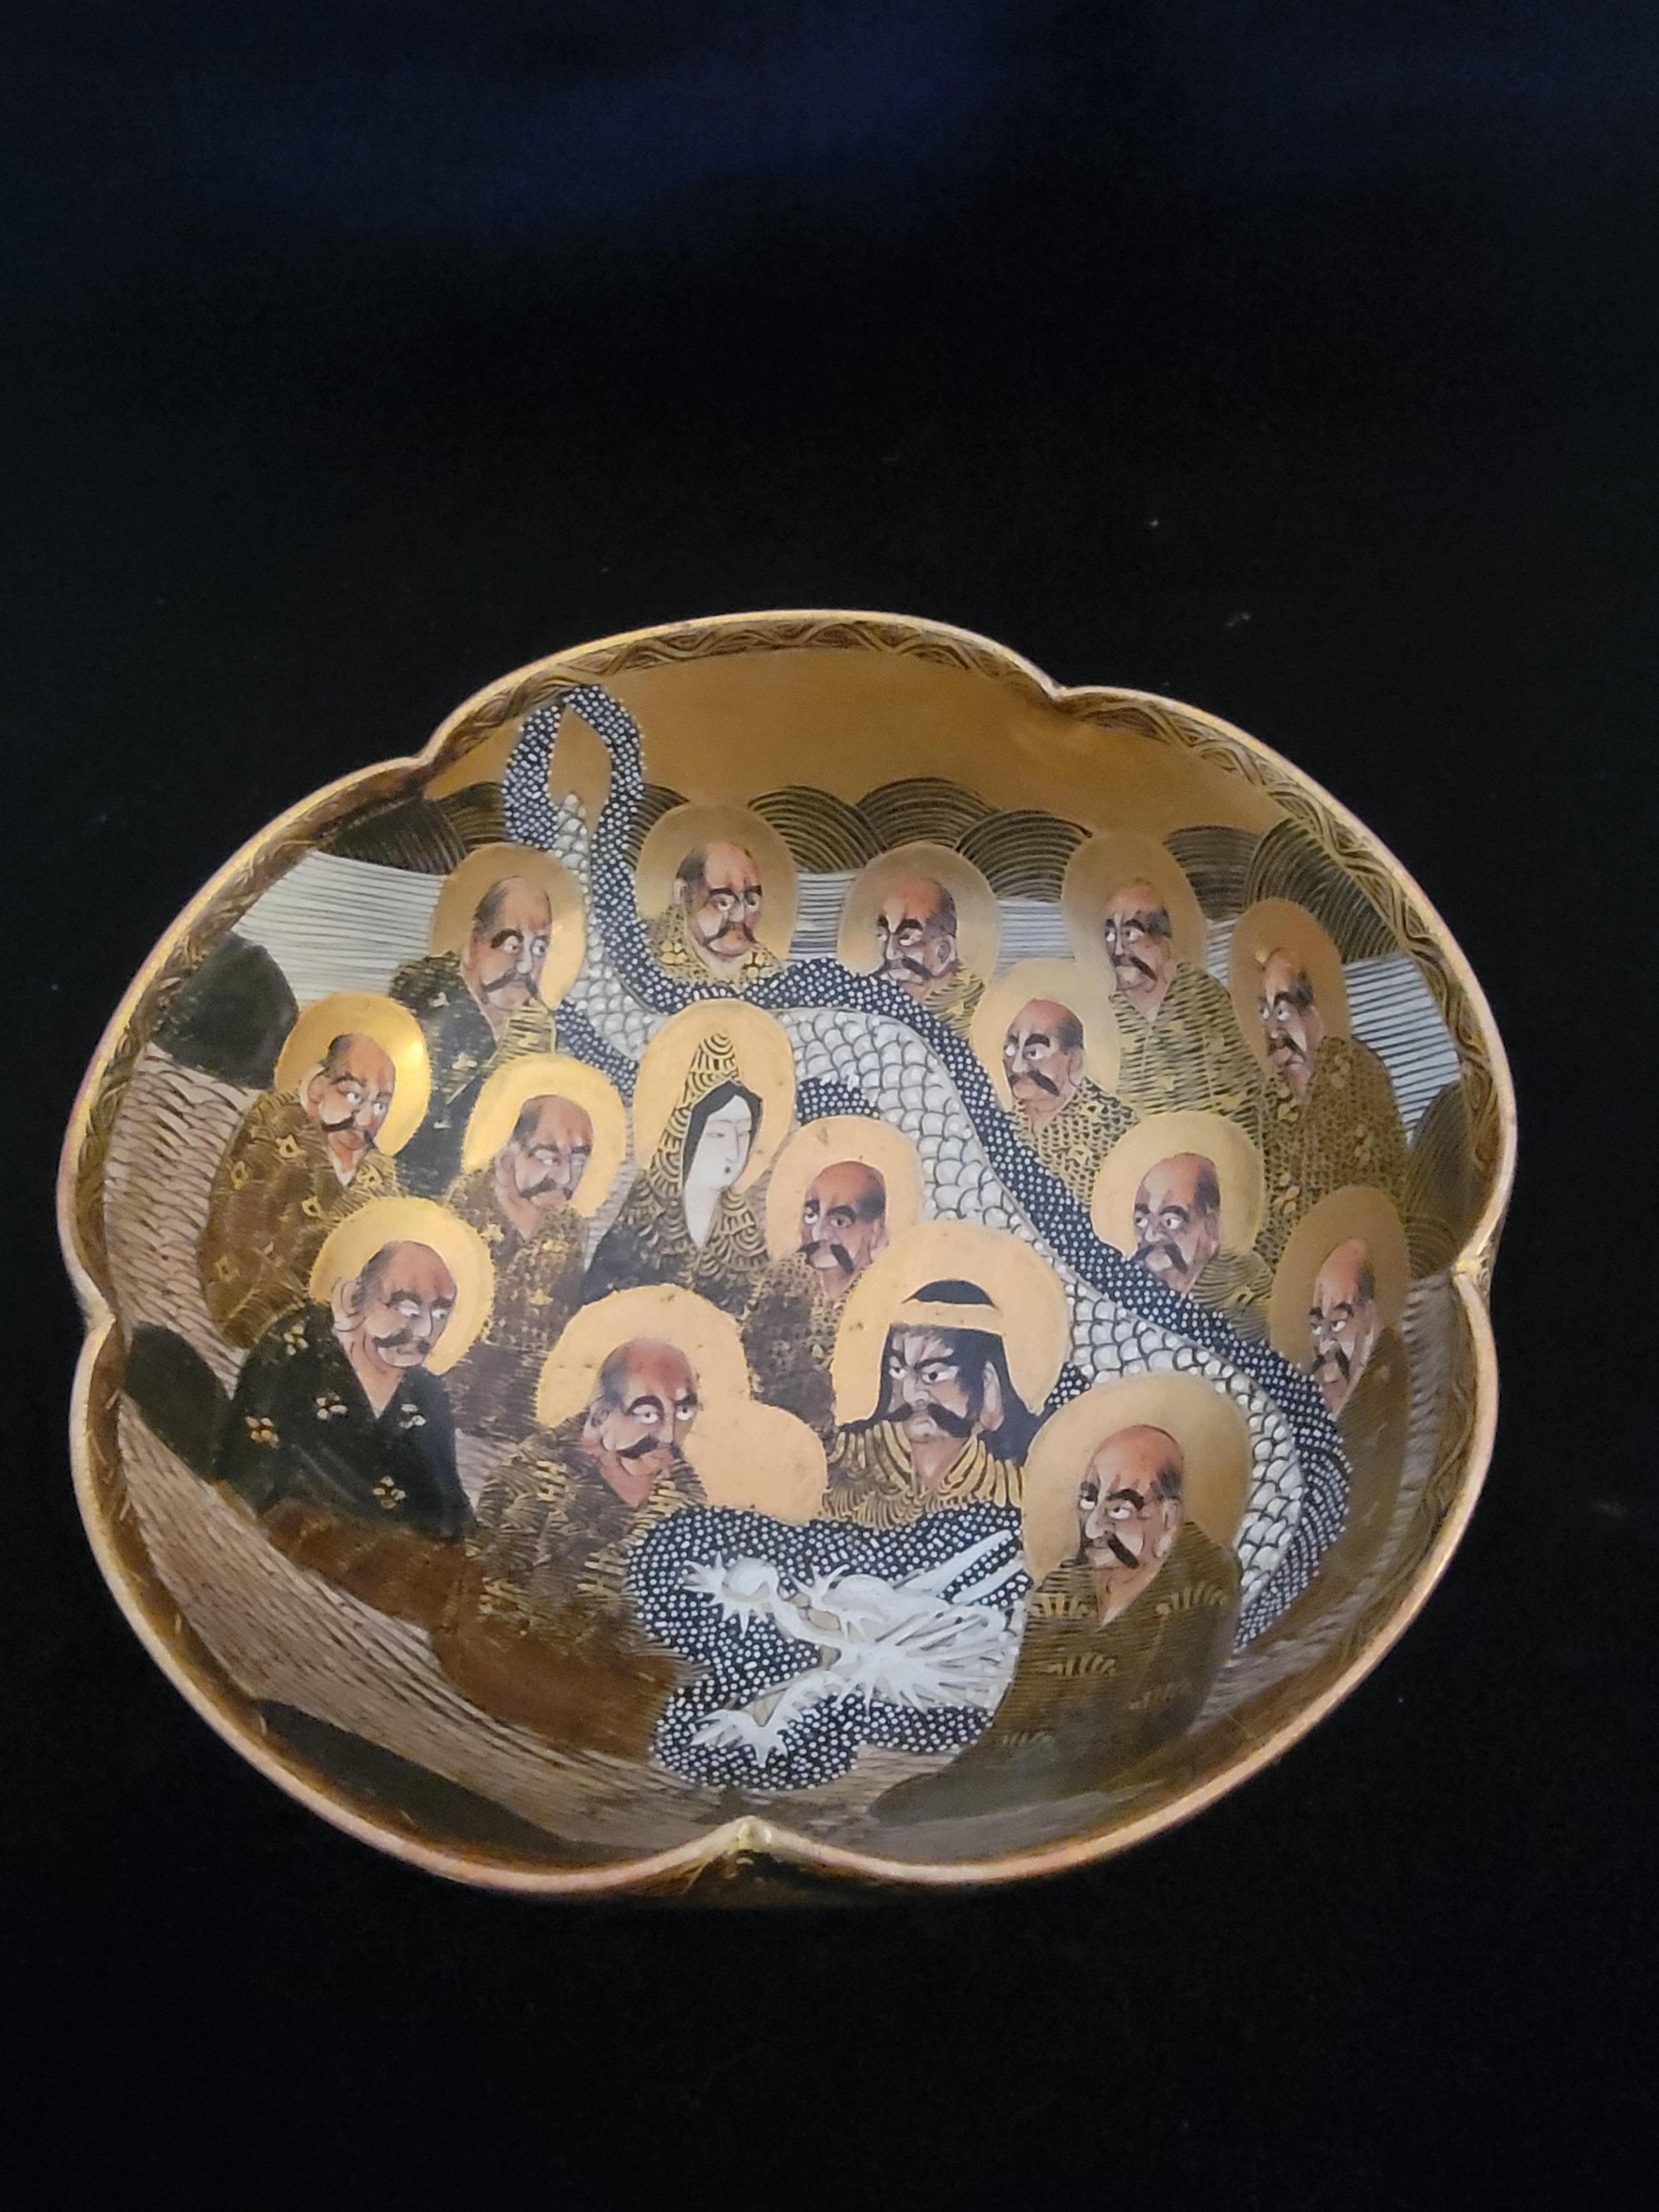 This is an amazing piece. It is not only stamped, Itis also signed by the artist. it is a Bowl of the Immortals. Shimazumon (emblem) on bottom .Meiji Period 1868-1912. It is quite a densely detailed bowl with scenes of the Immortals and black and